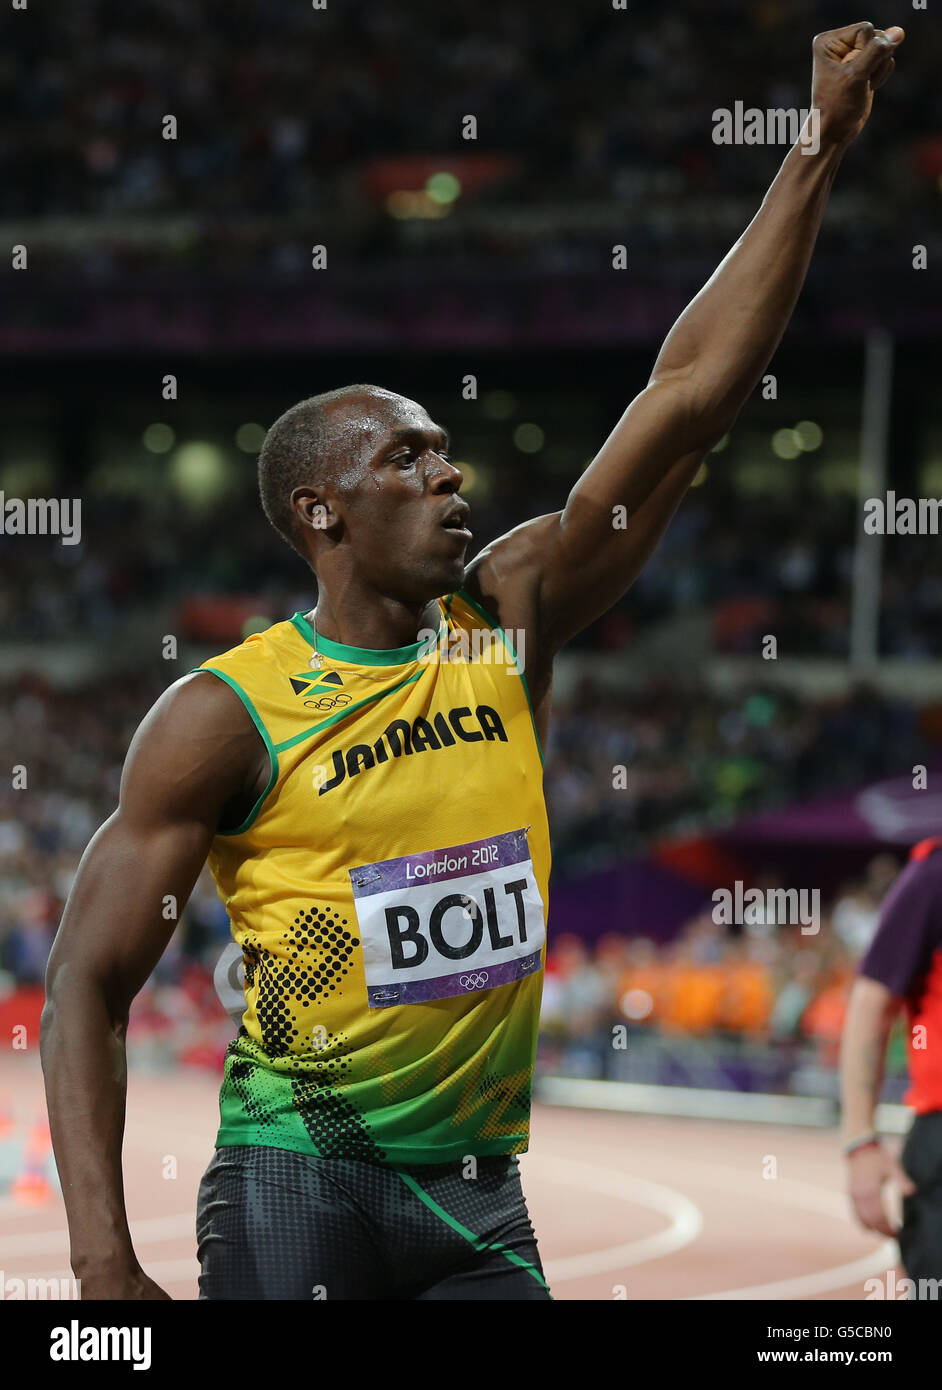 London Olympic Games - Day 9. Jamaica's Usain Bolt celebrates winning the Men's 100m Final at the Olympic Stadium on day nine of the London 2012 Olympic Games. Stock Photo